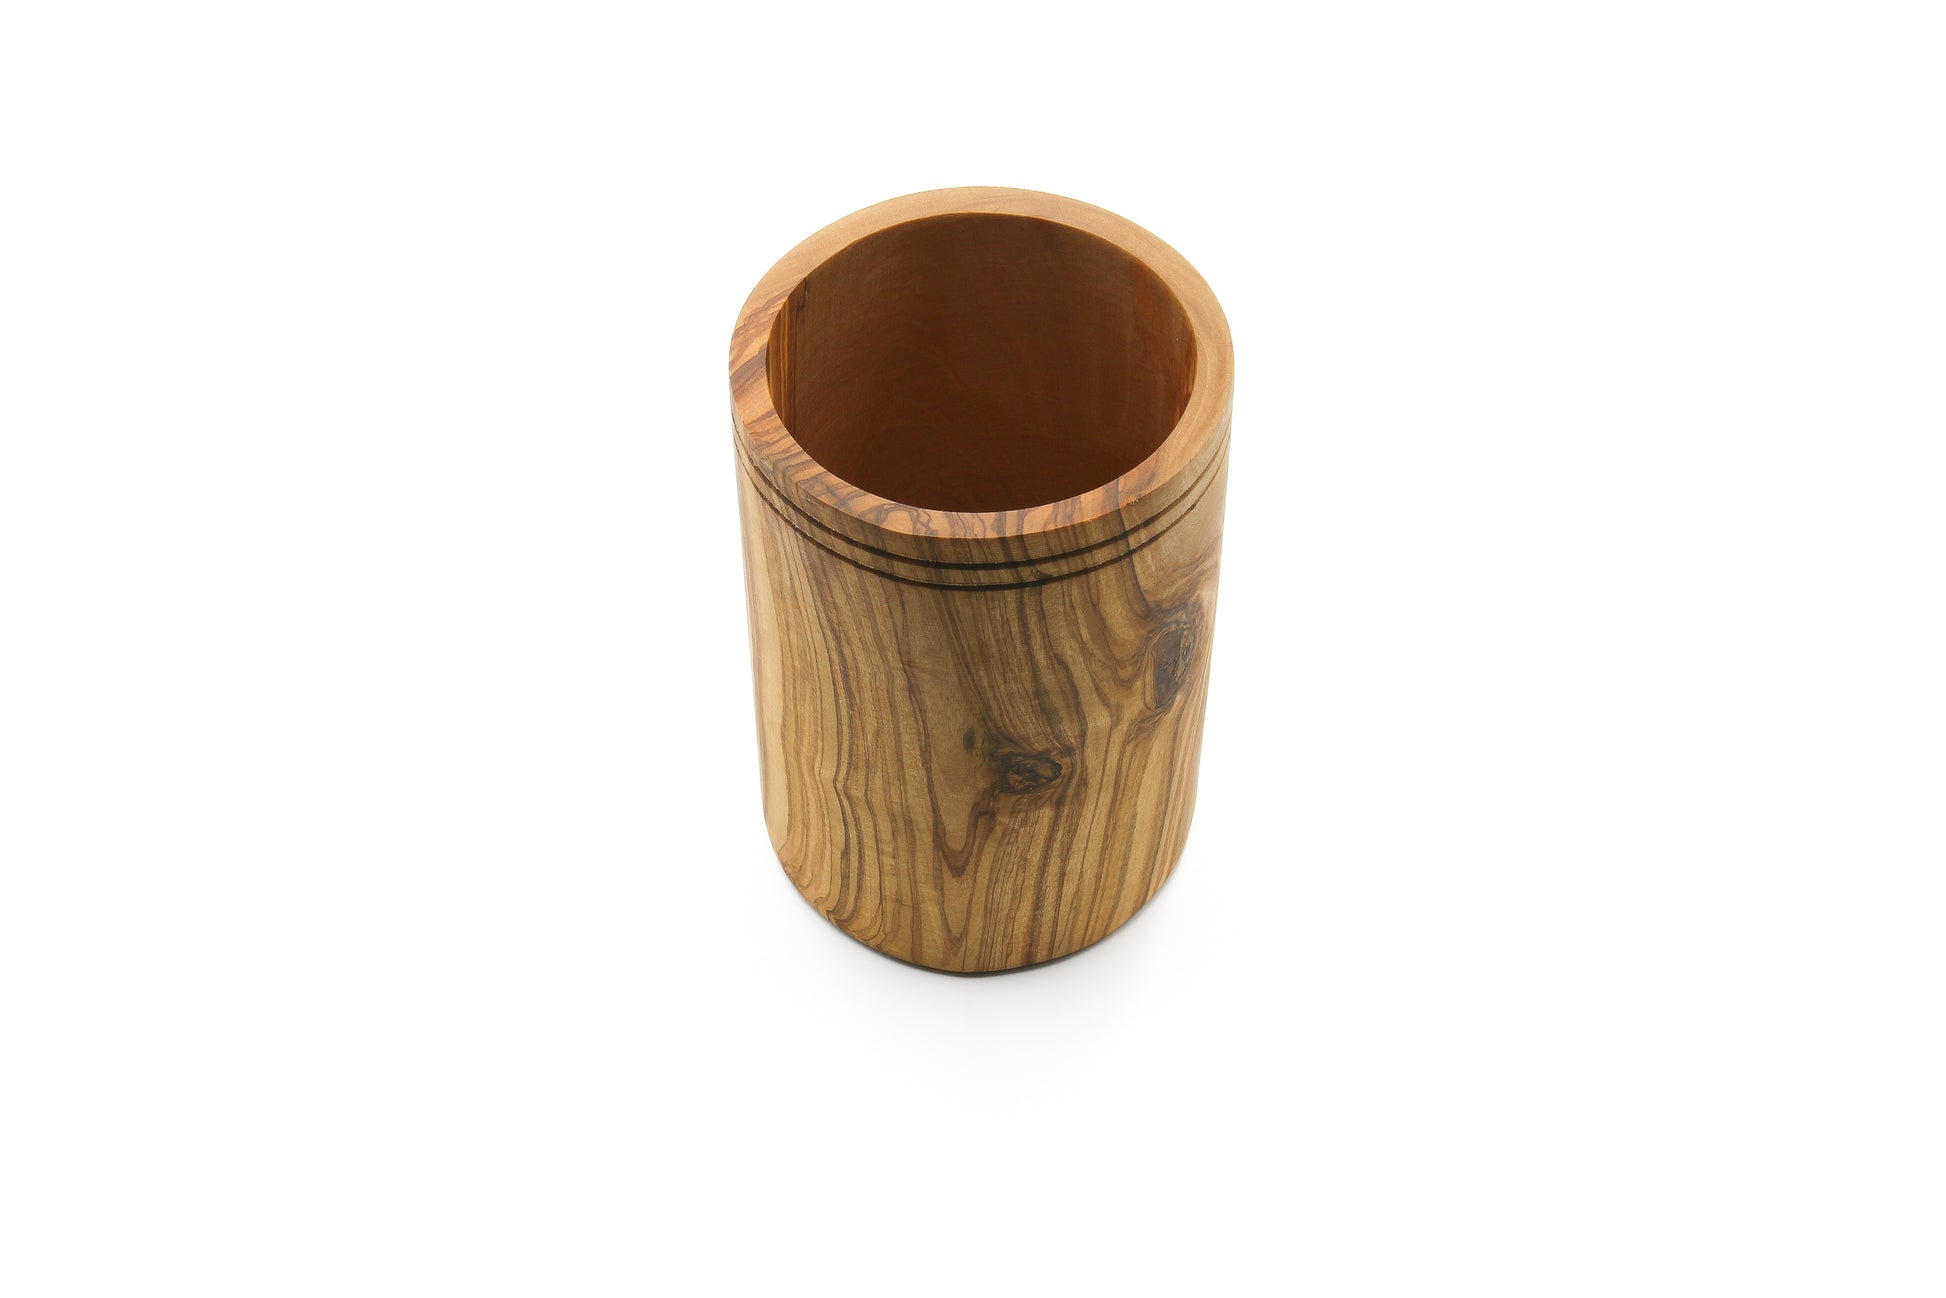 Vintage olive wood utensil caddy for your countertop